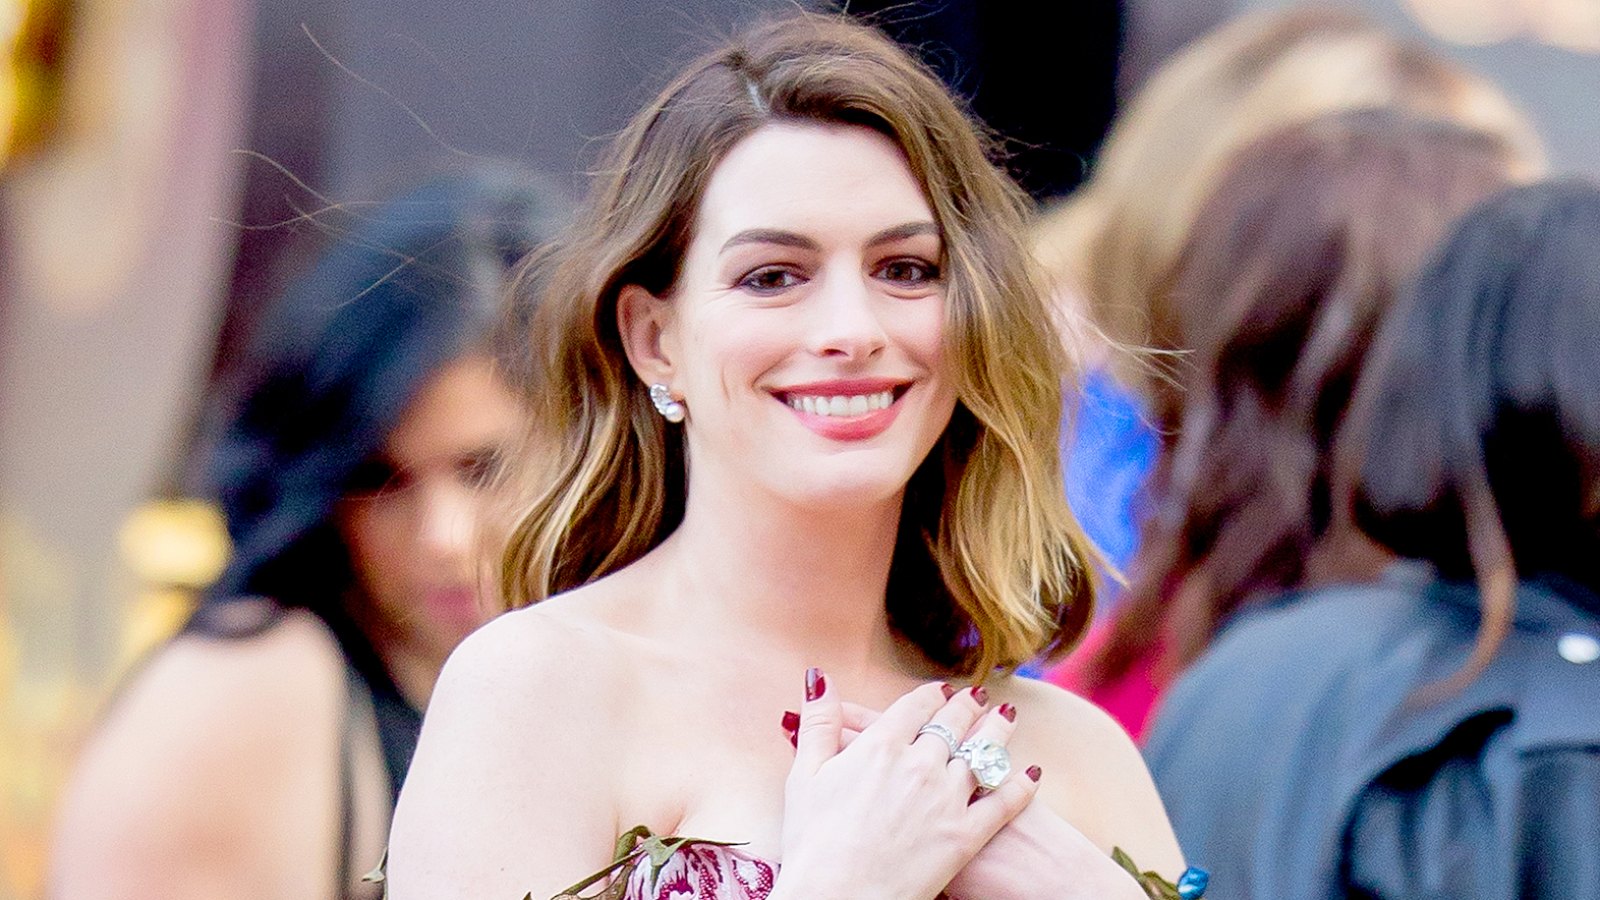 Anne Hathaway is seen attending the premiere of Disney's 'Alice Through The Looking Glass' on May 23, 2016 in Los Angeles, California.